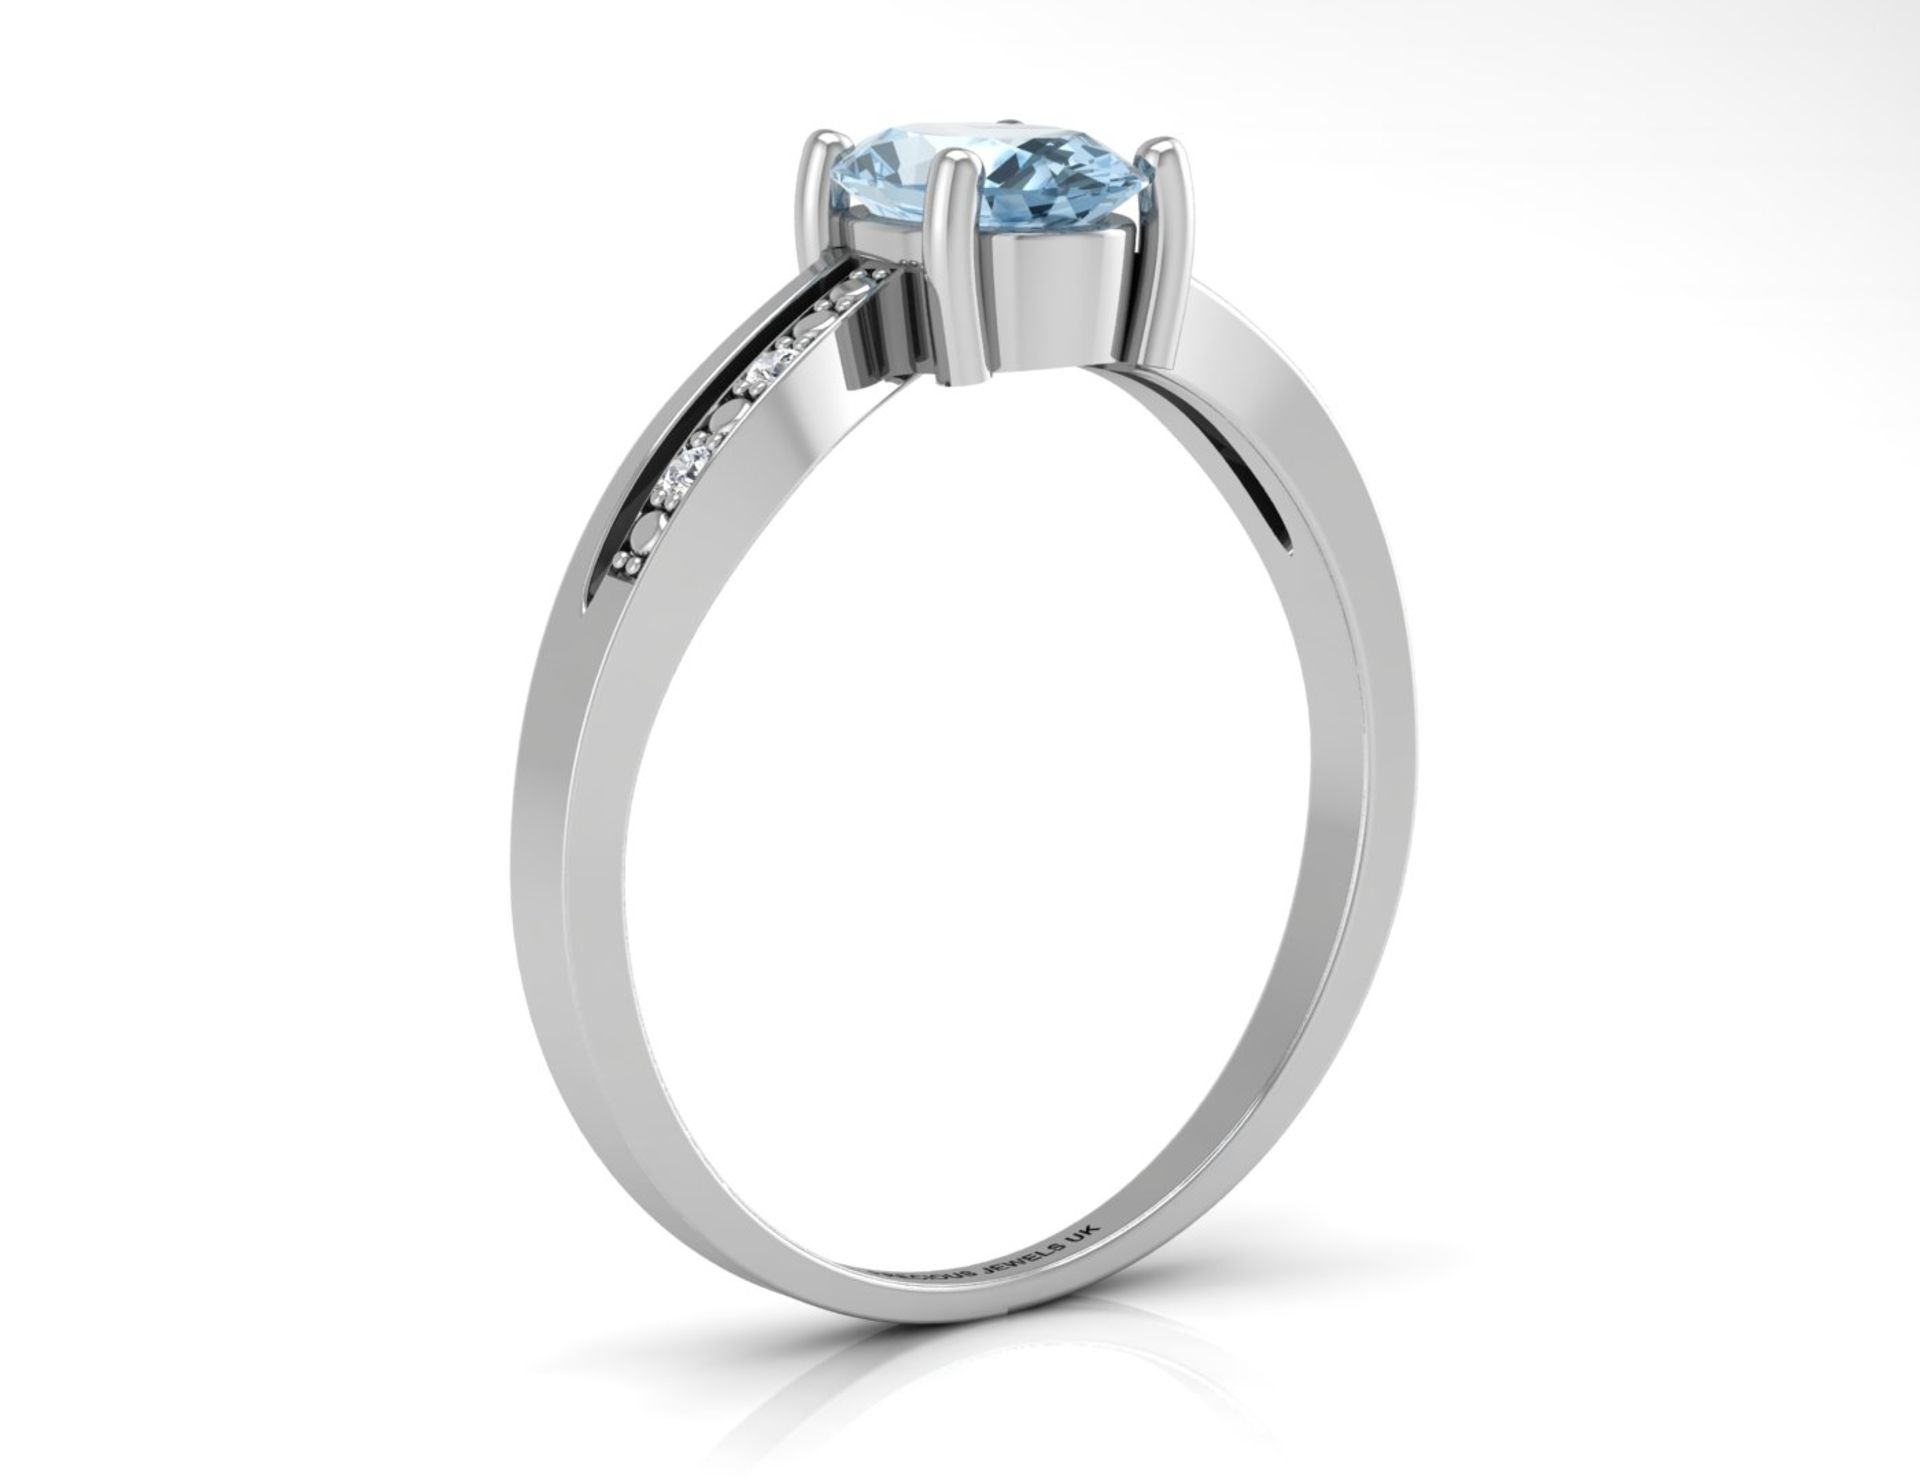 9ct White Gold Diamond And Blue Topaz Ring (BT1.00) 0.02 Carats - Valued By GIE £1,070.00 - An - Image 2 of 5